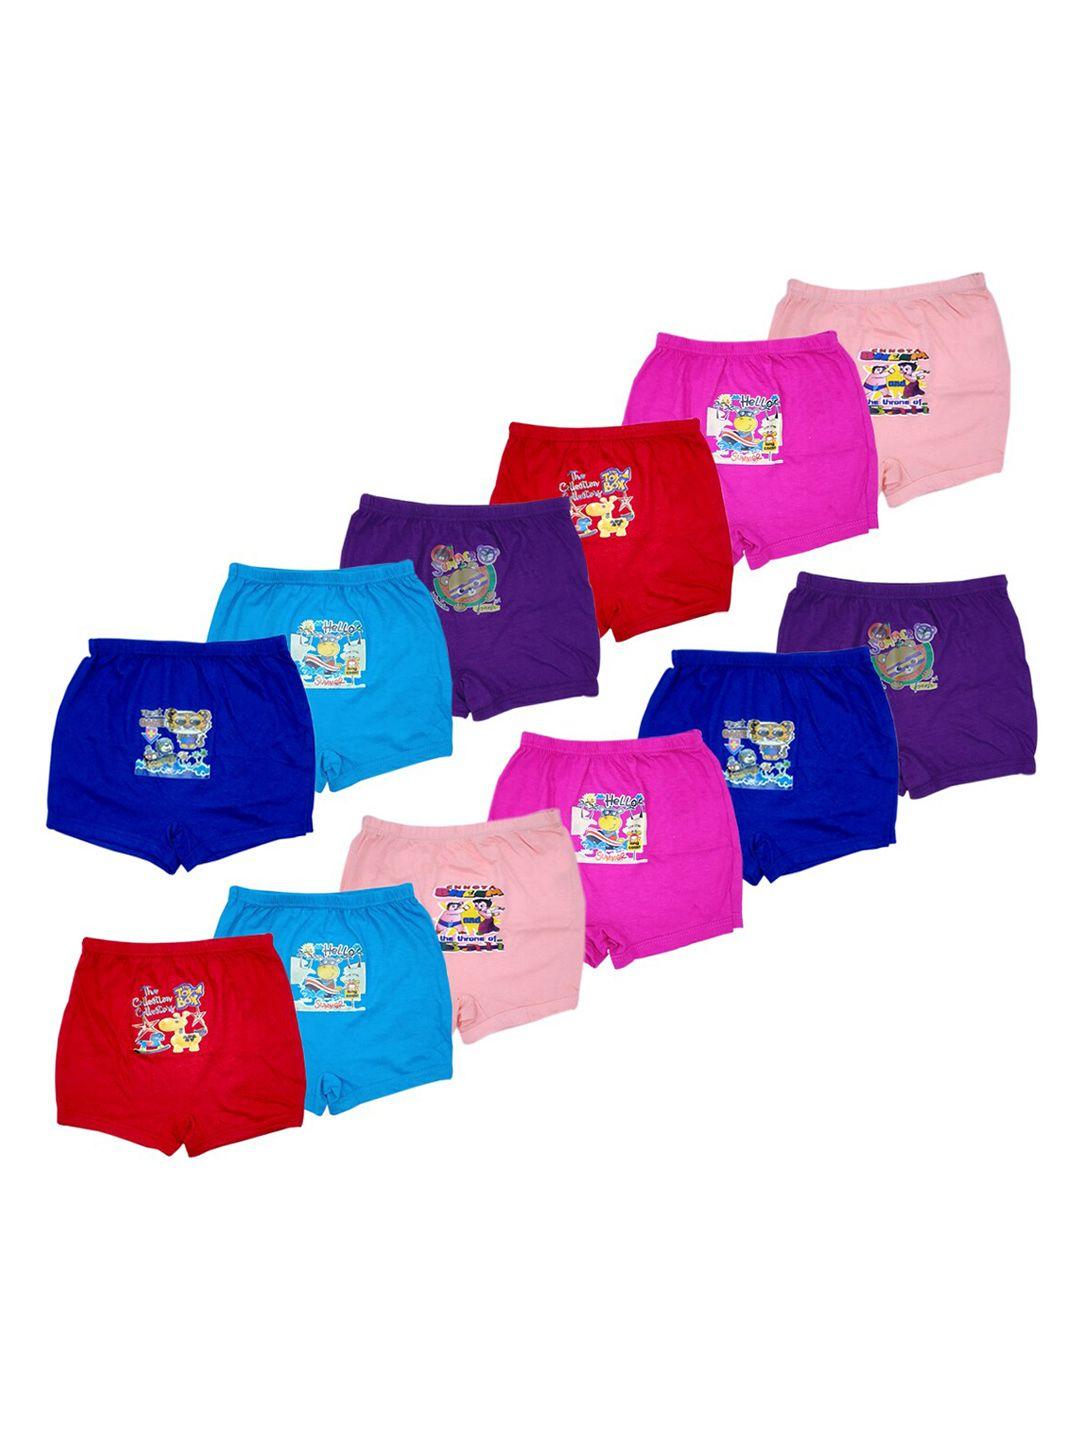 baesd infants pack of 12 pure cotton briefs 30_dra_po-12